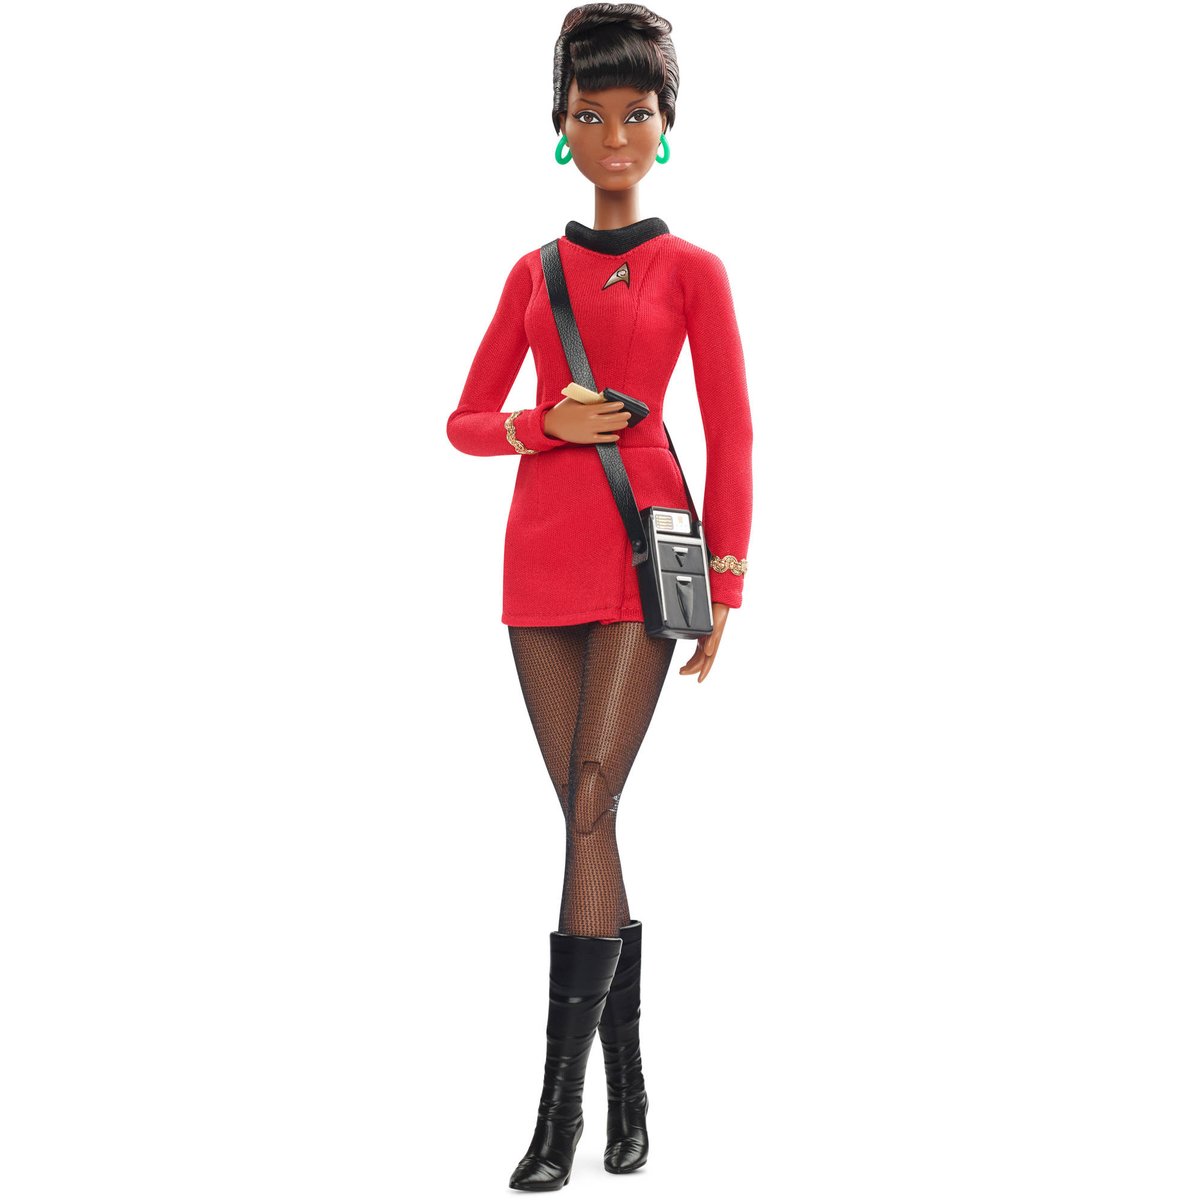 To those disparaging HRC for using the hashtag #HillaryBarbie, let's see YOUR Barbie. 

OF you. 
Not just owned by you. 😎🖖🏾 

#ImABarbieGirl